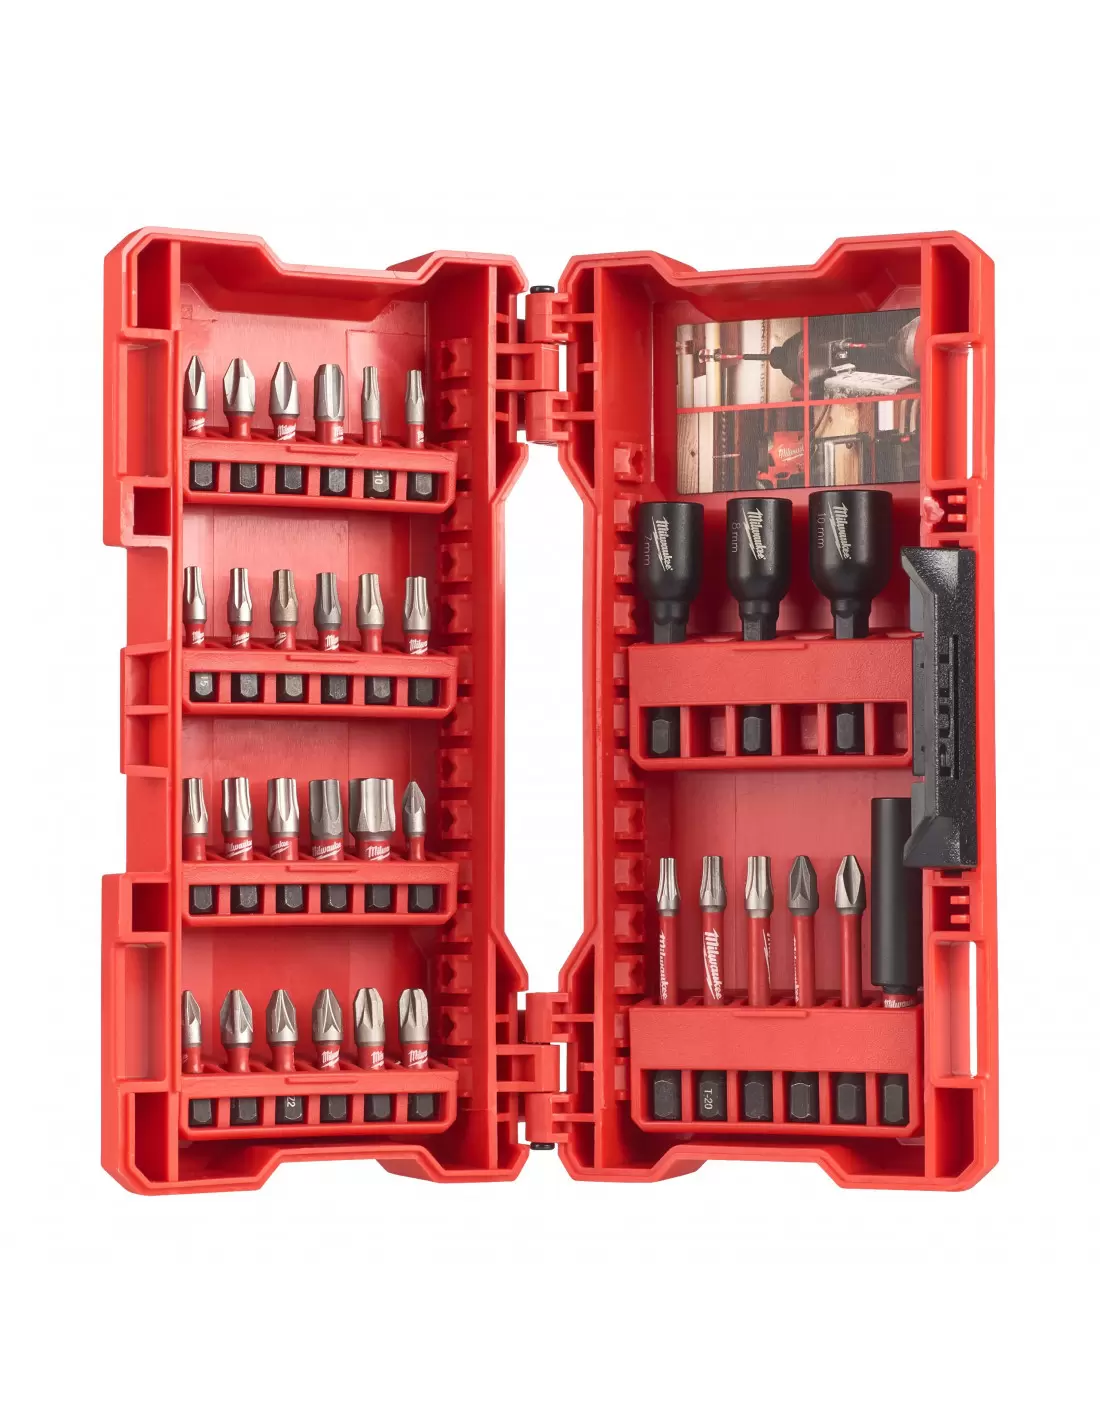 MILWAUKEE Coffret 14 embouts + porte-embout Shockwave - 4932430904